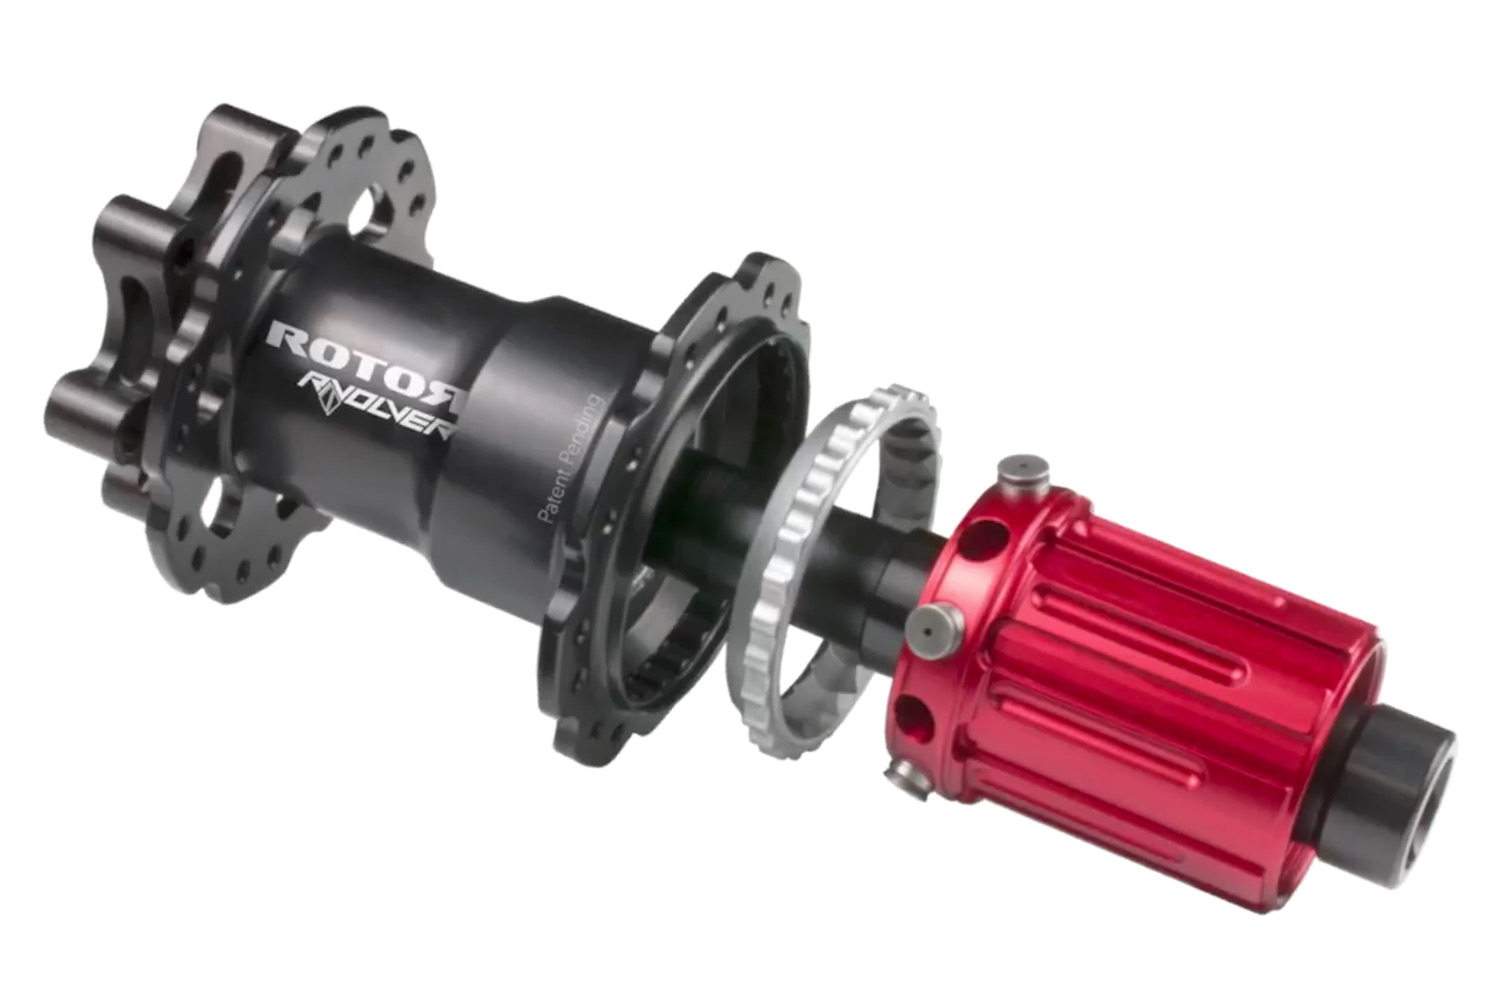 Rotor engages innovative RVOLVER radial cylindrical pawl bike hubs